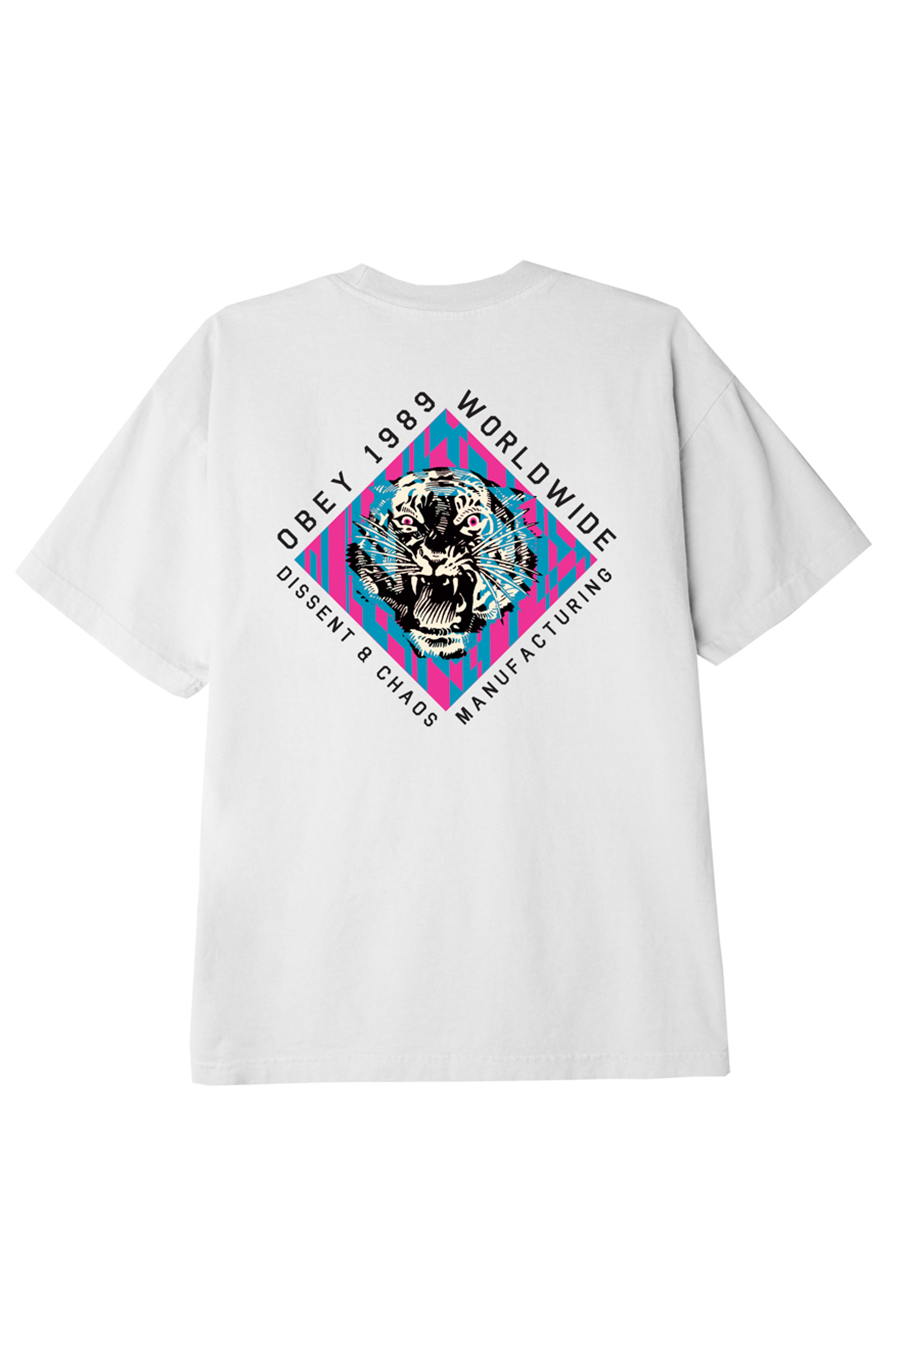 Dissent & Chaos Tiger Tee | White - Main Image Number 1 of 2